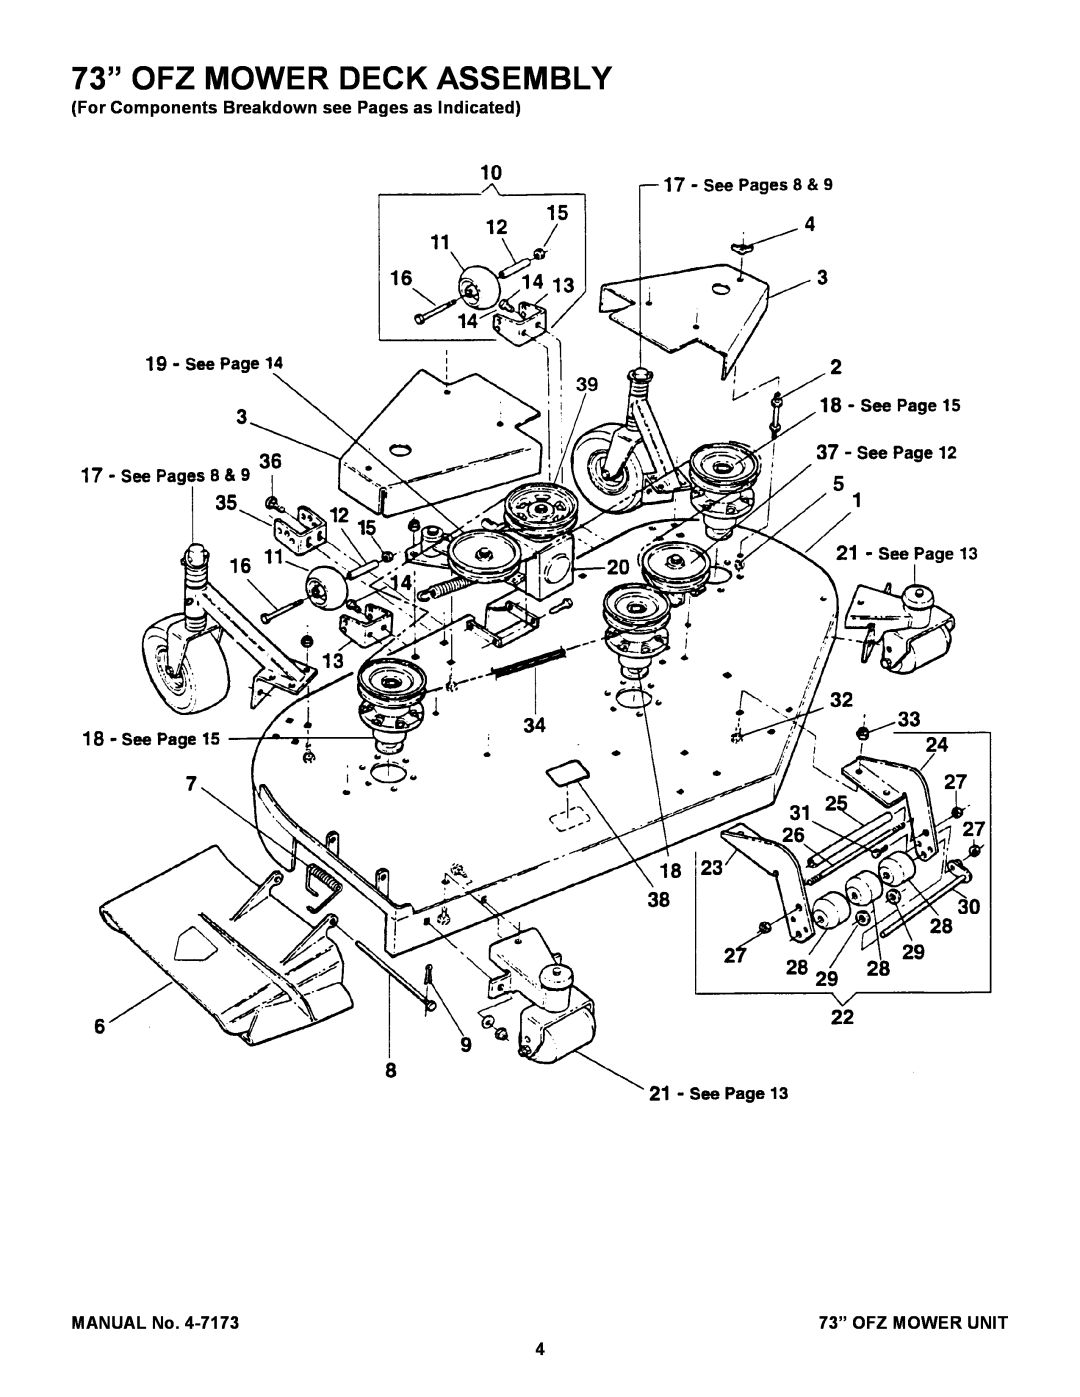 Snapper ZF7302M, ZF7301M 73” OFZ MOWER DECK ASSEMBLY, For Components Breakdown see Pages as Indicated, 73” OFZ MOWER UNIT 